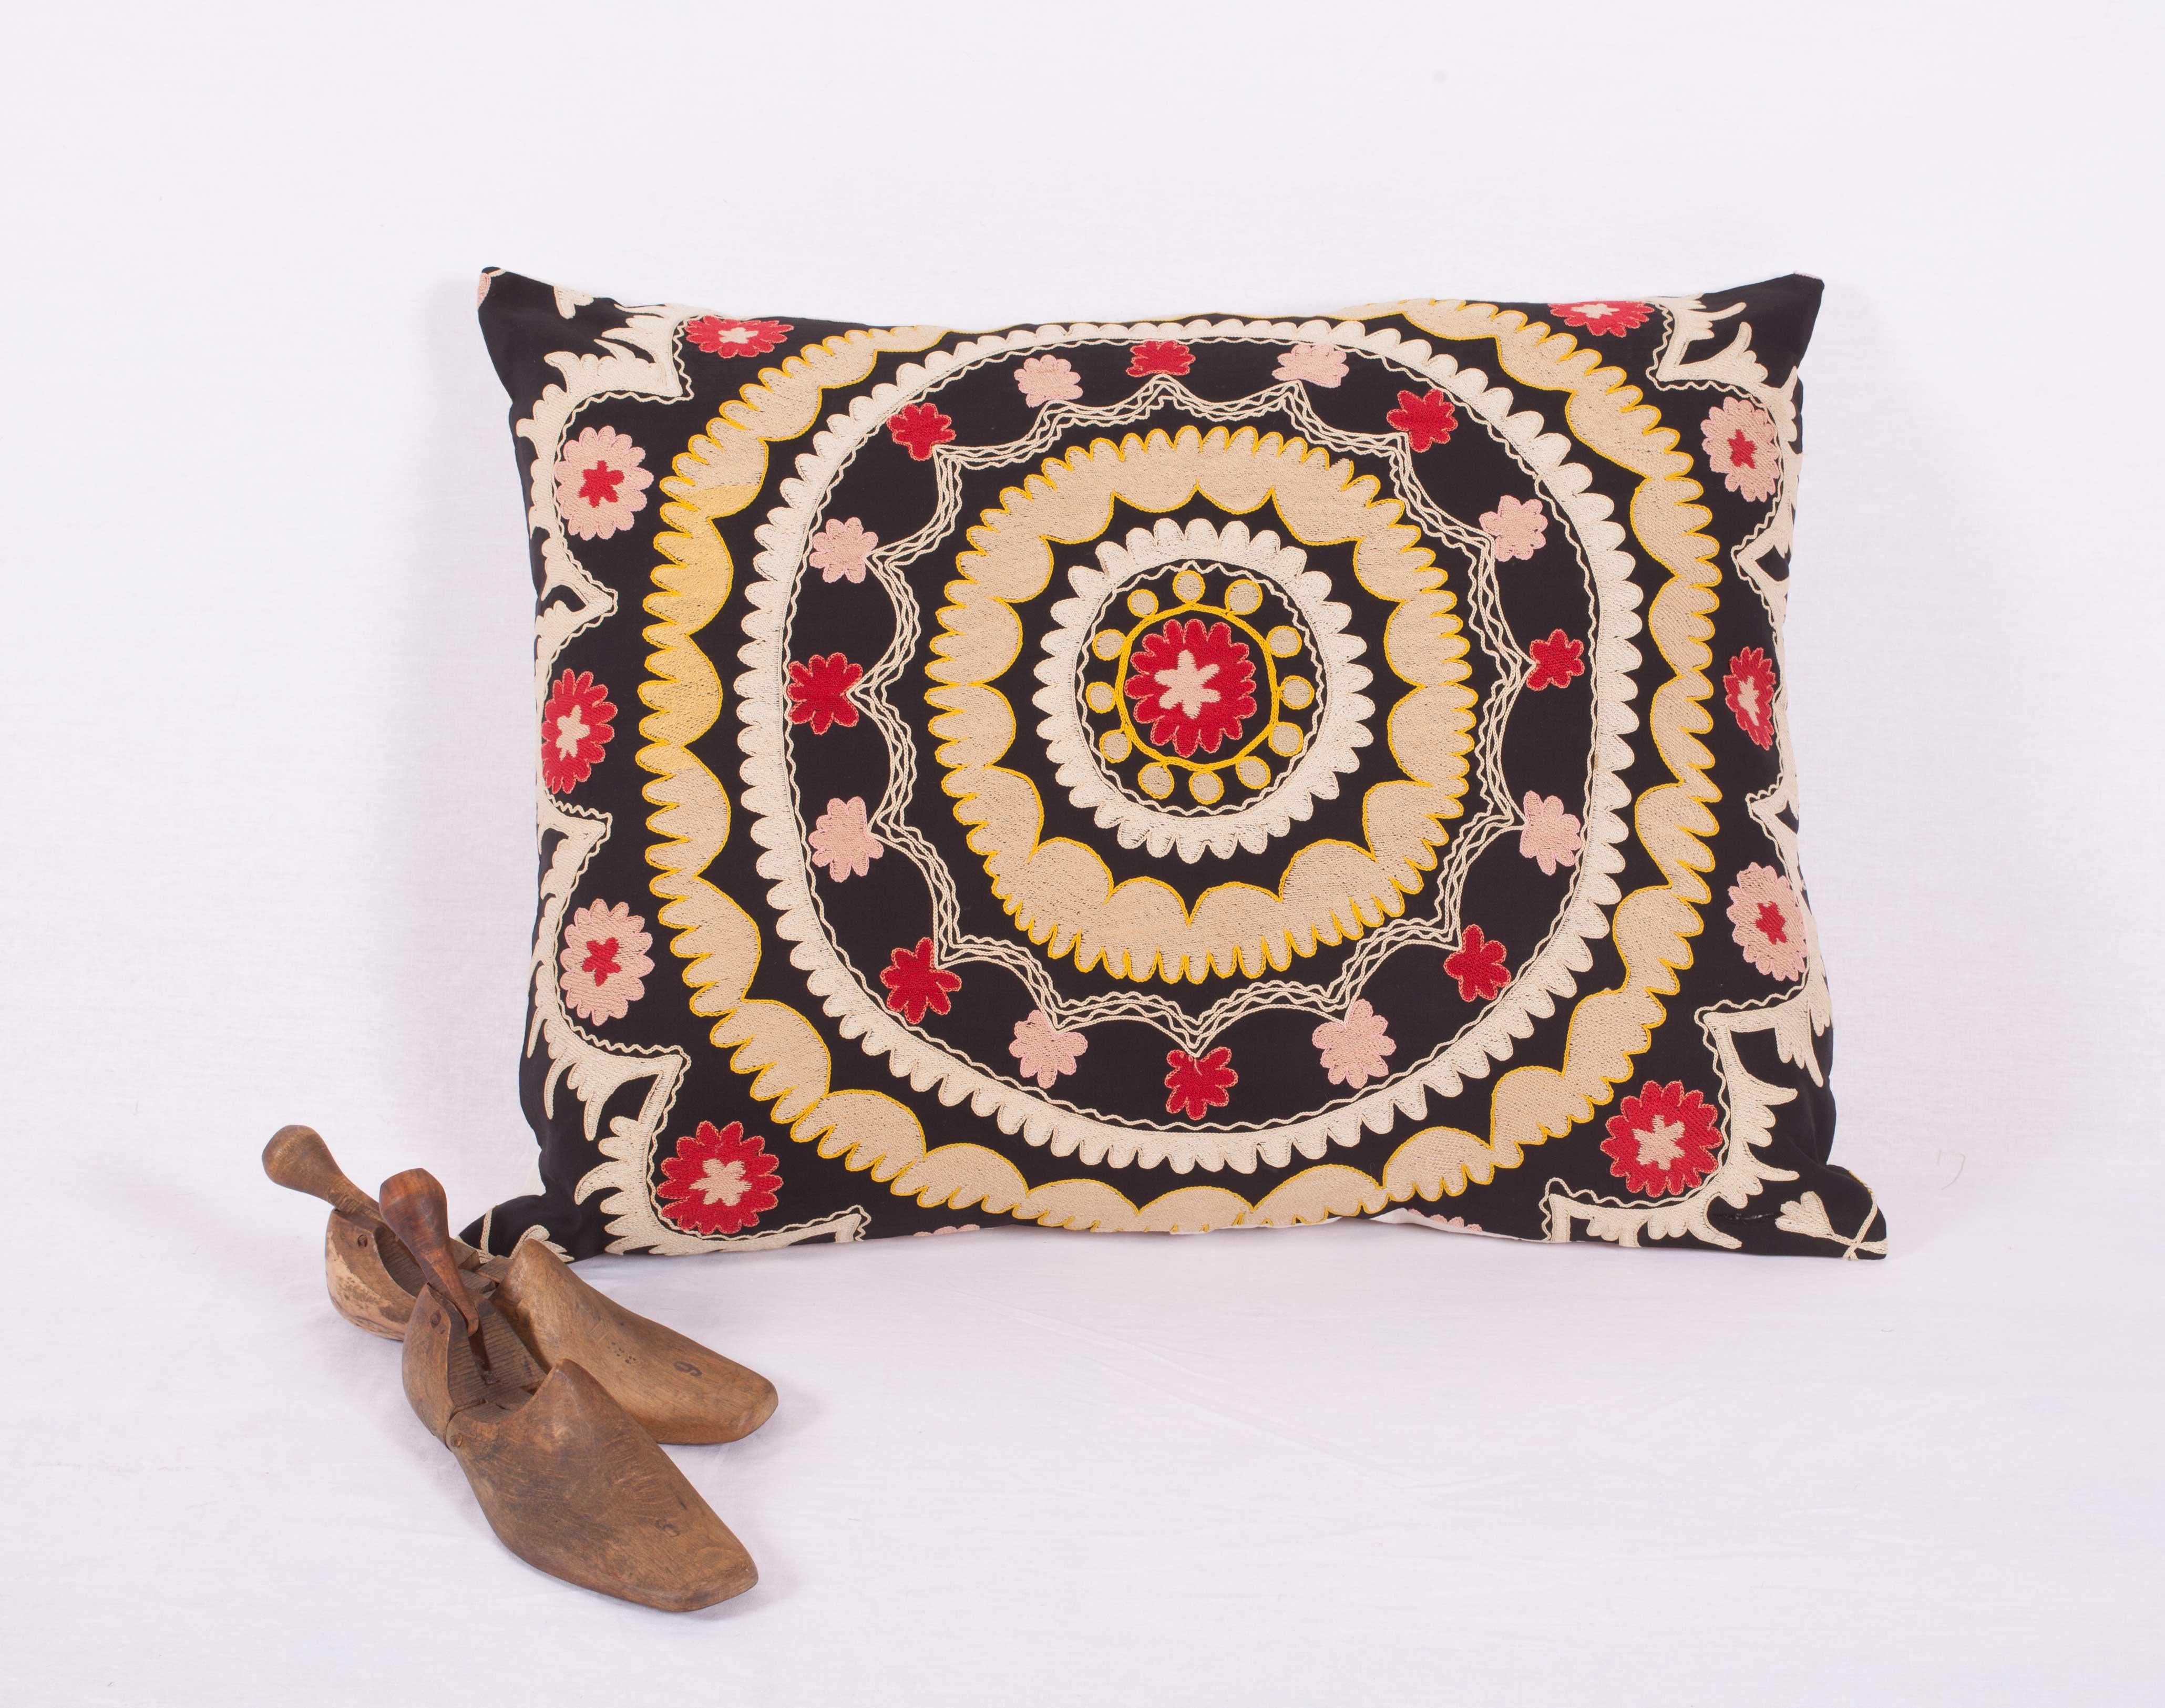 The pillow is made from an old Uzbek Samarkand Suzani. It does not come with an insert but comes with a bag made to the size and out of cotton to accommodate the filling. The backing is made of linen. Please note filling is not provided. Since the